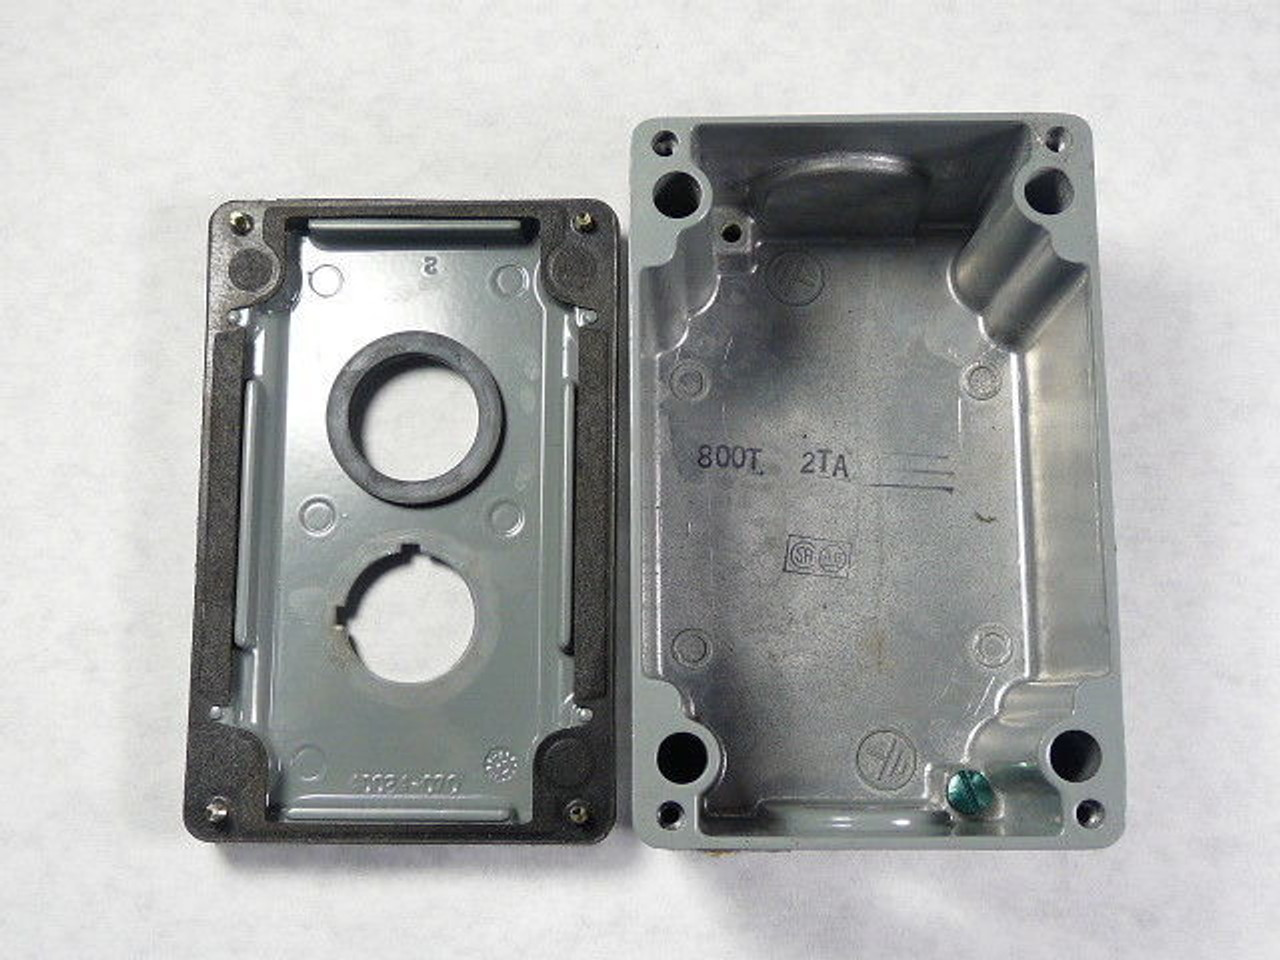 Allen-Bradley 800T-2TA Pushbutton Station 2-Hole 10A 600VAC USED